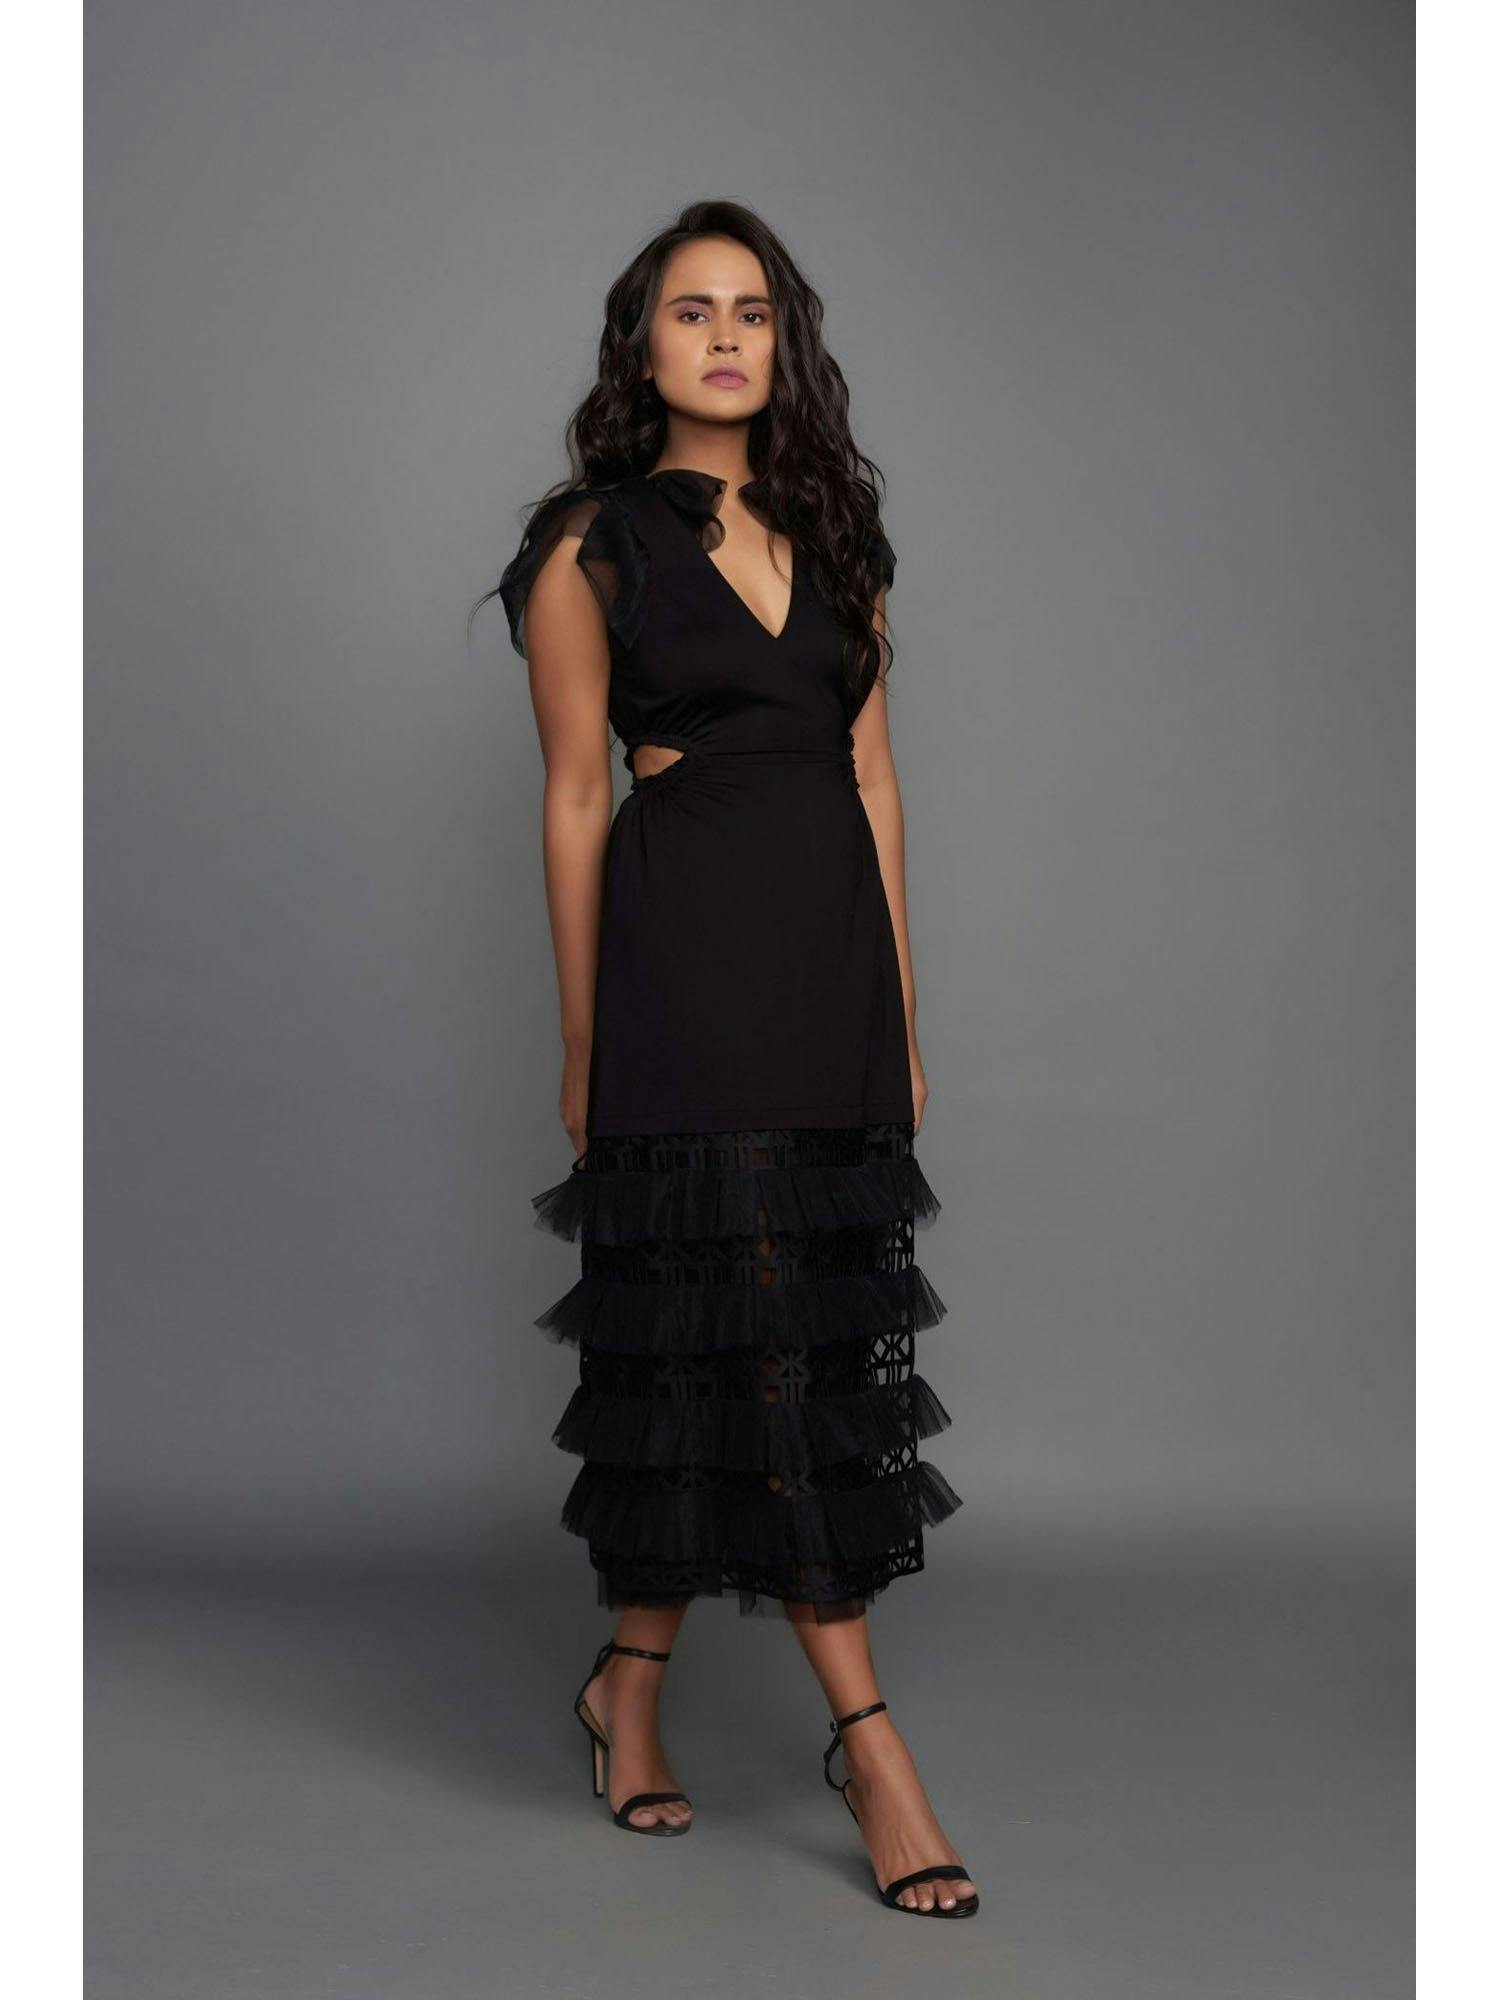 black dress with a cut out and cutwork on the bottom, a product by Deepika Arora